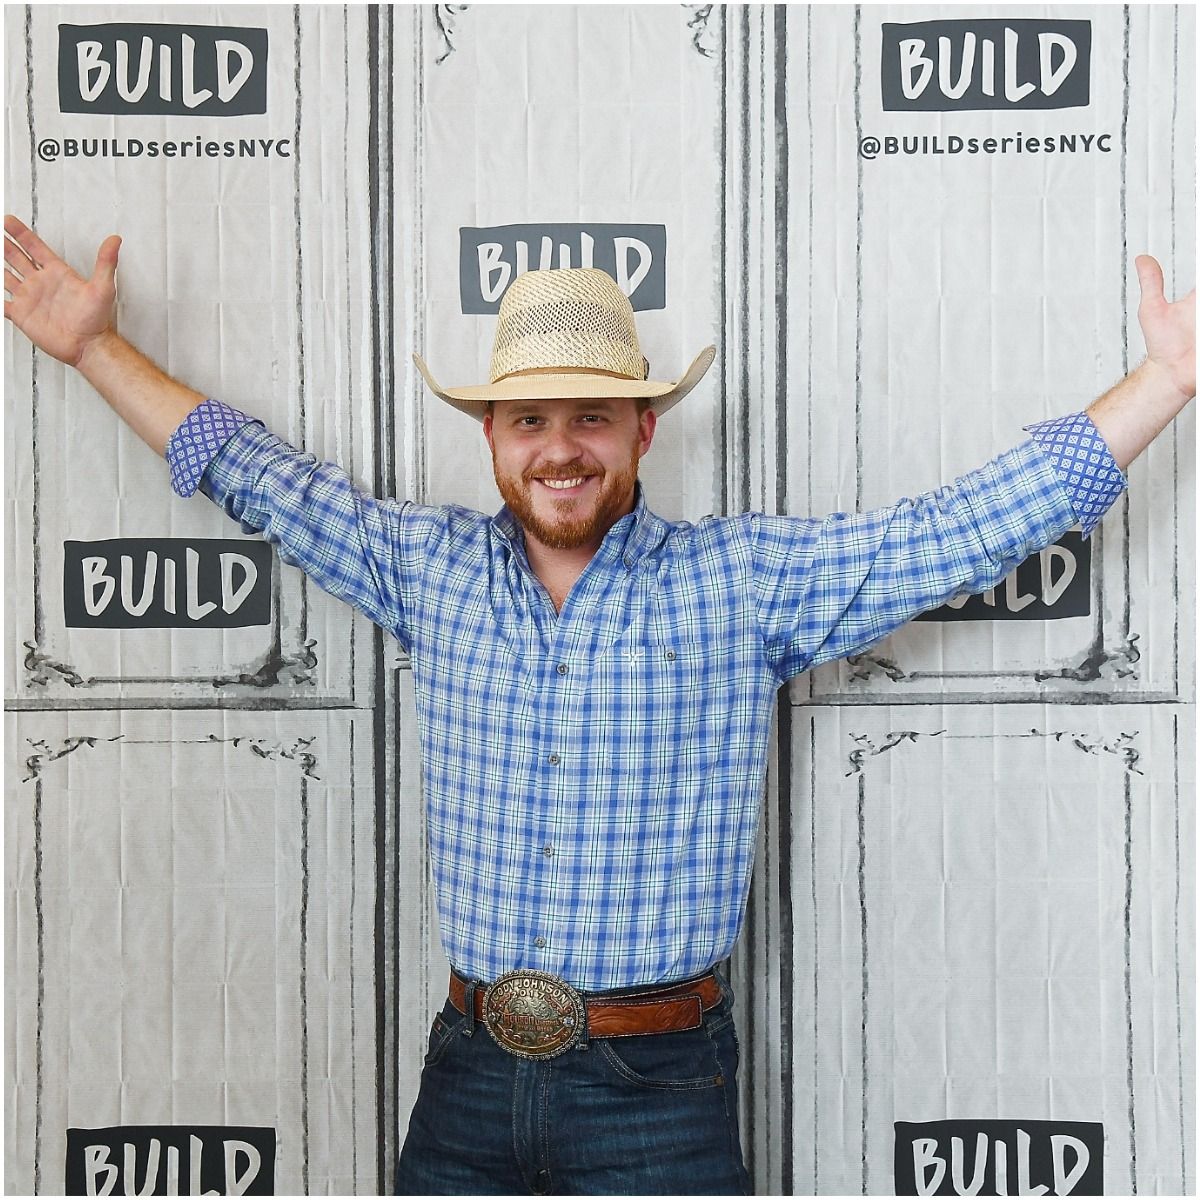 what is the net worth of Cody Johnson